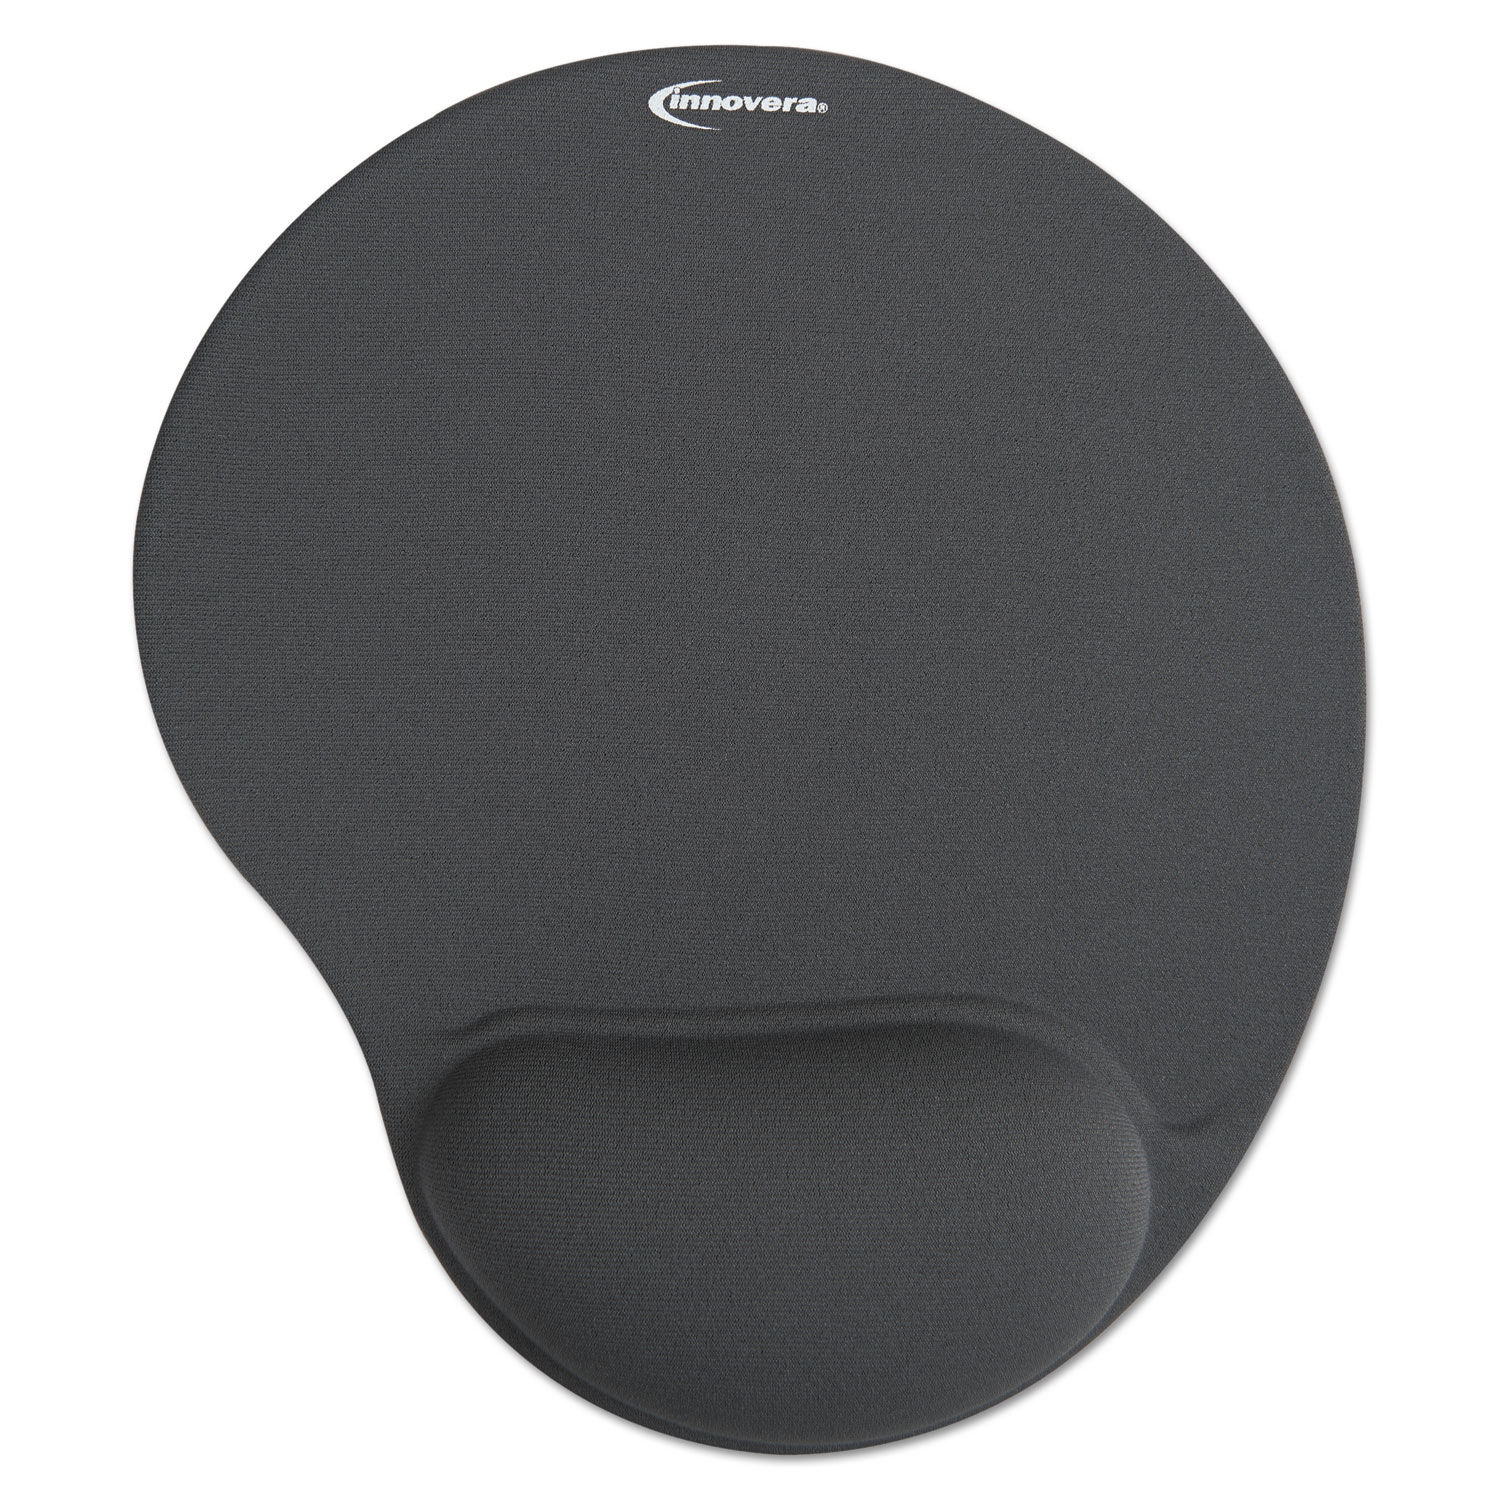 Mouse Pad with Fabric-Covered Gel Wrist Rest 10.37 x 8.87, Gray